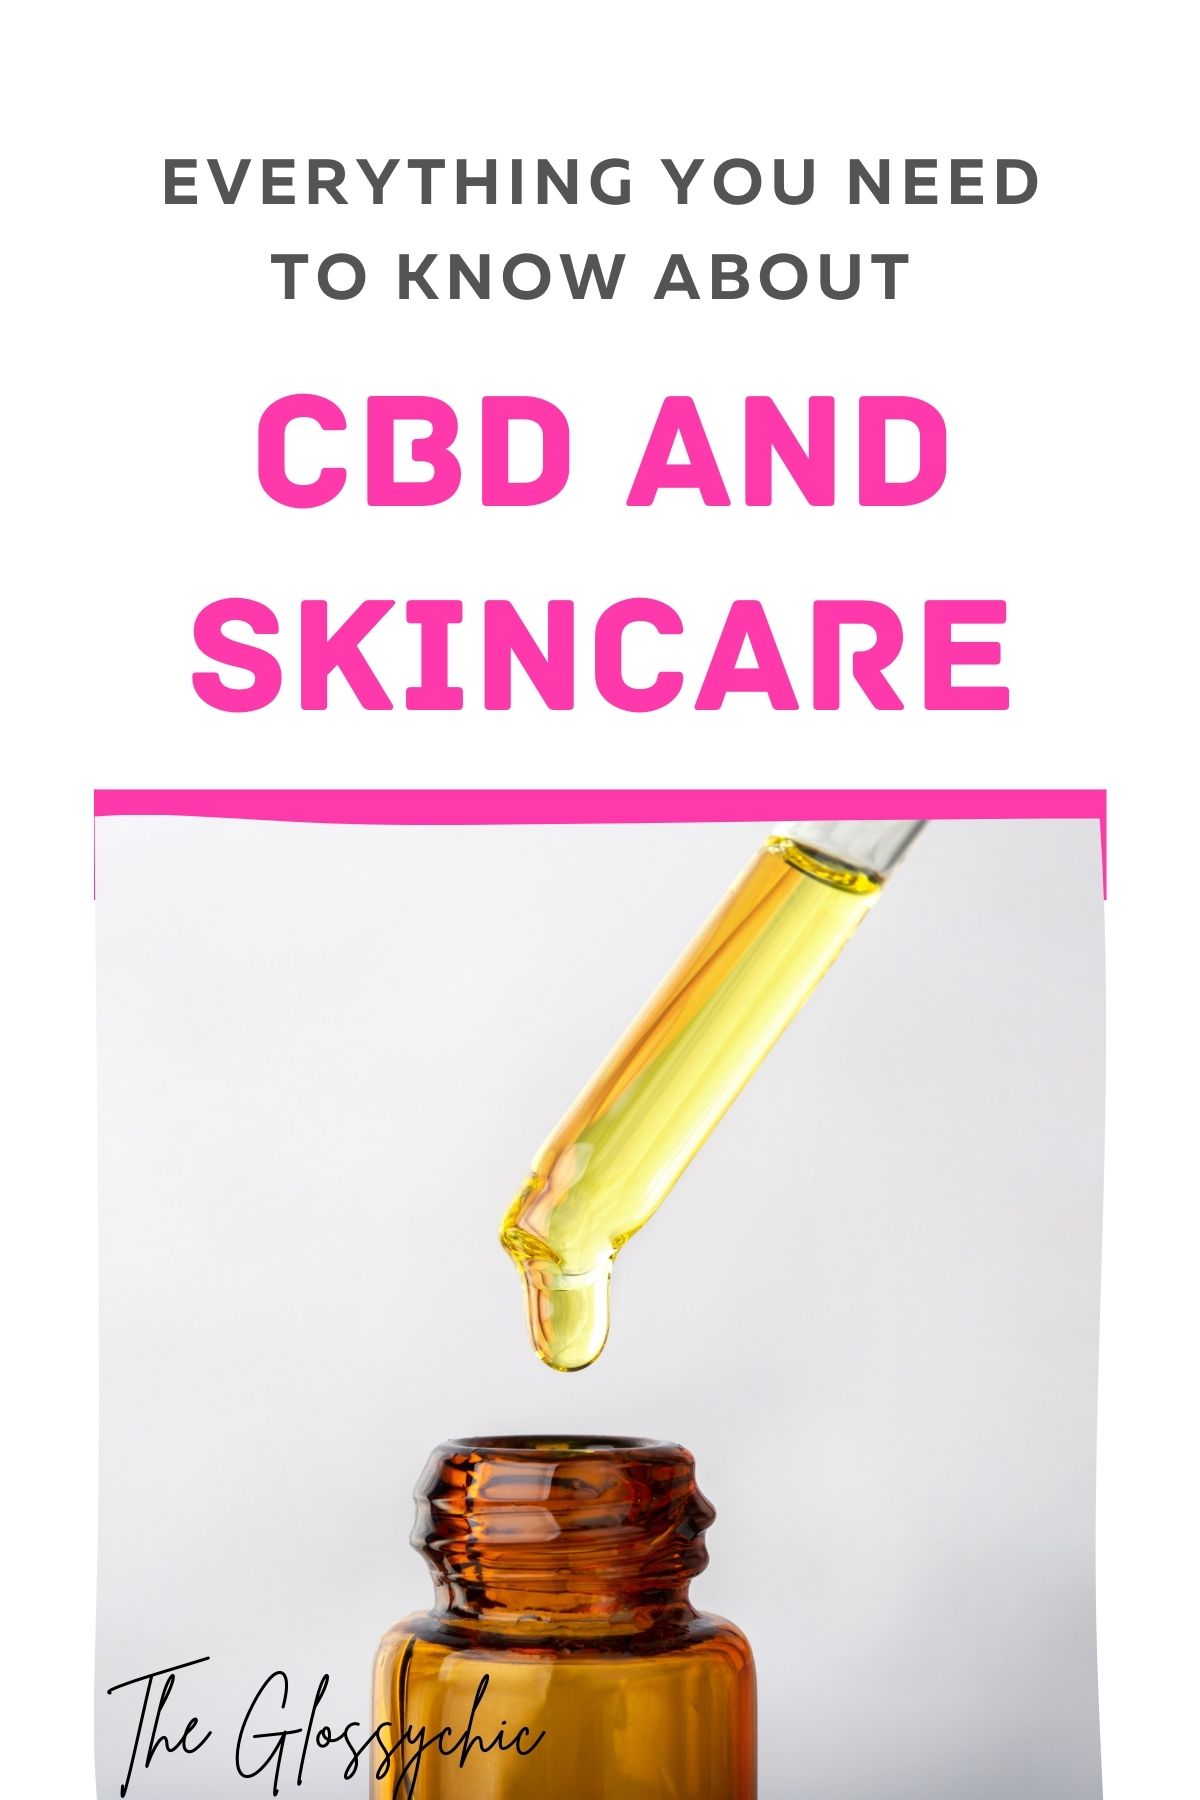 Everything You Need To Know About CBD And Skincare